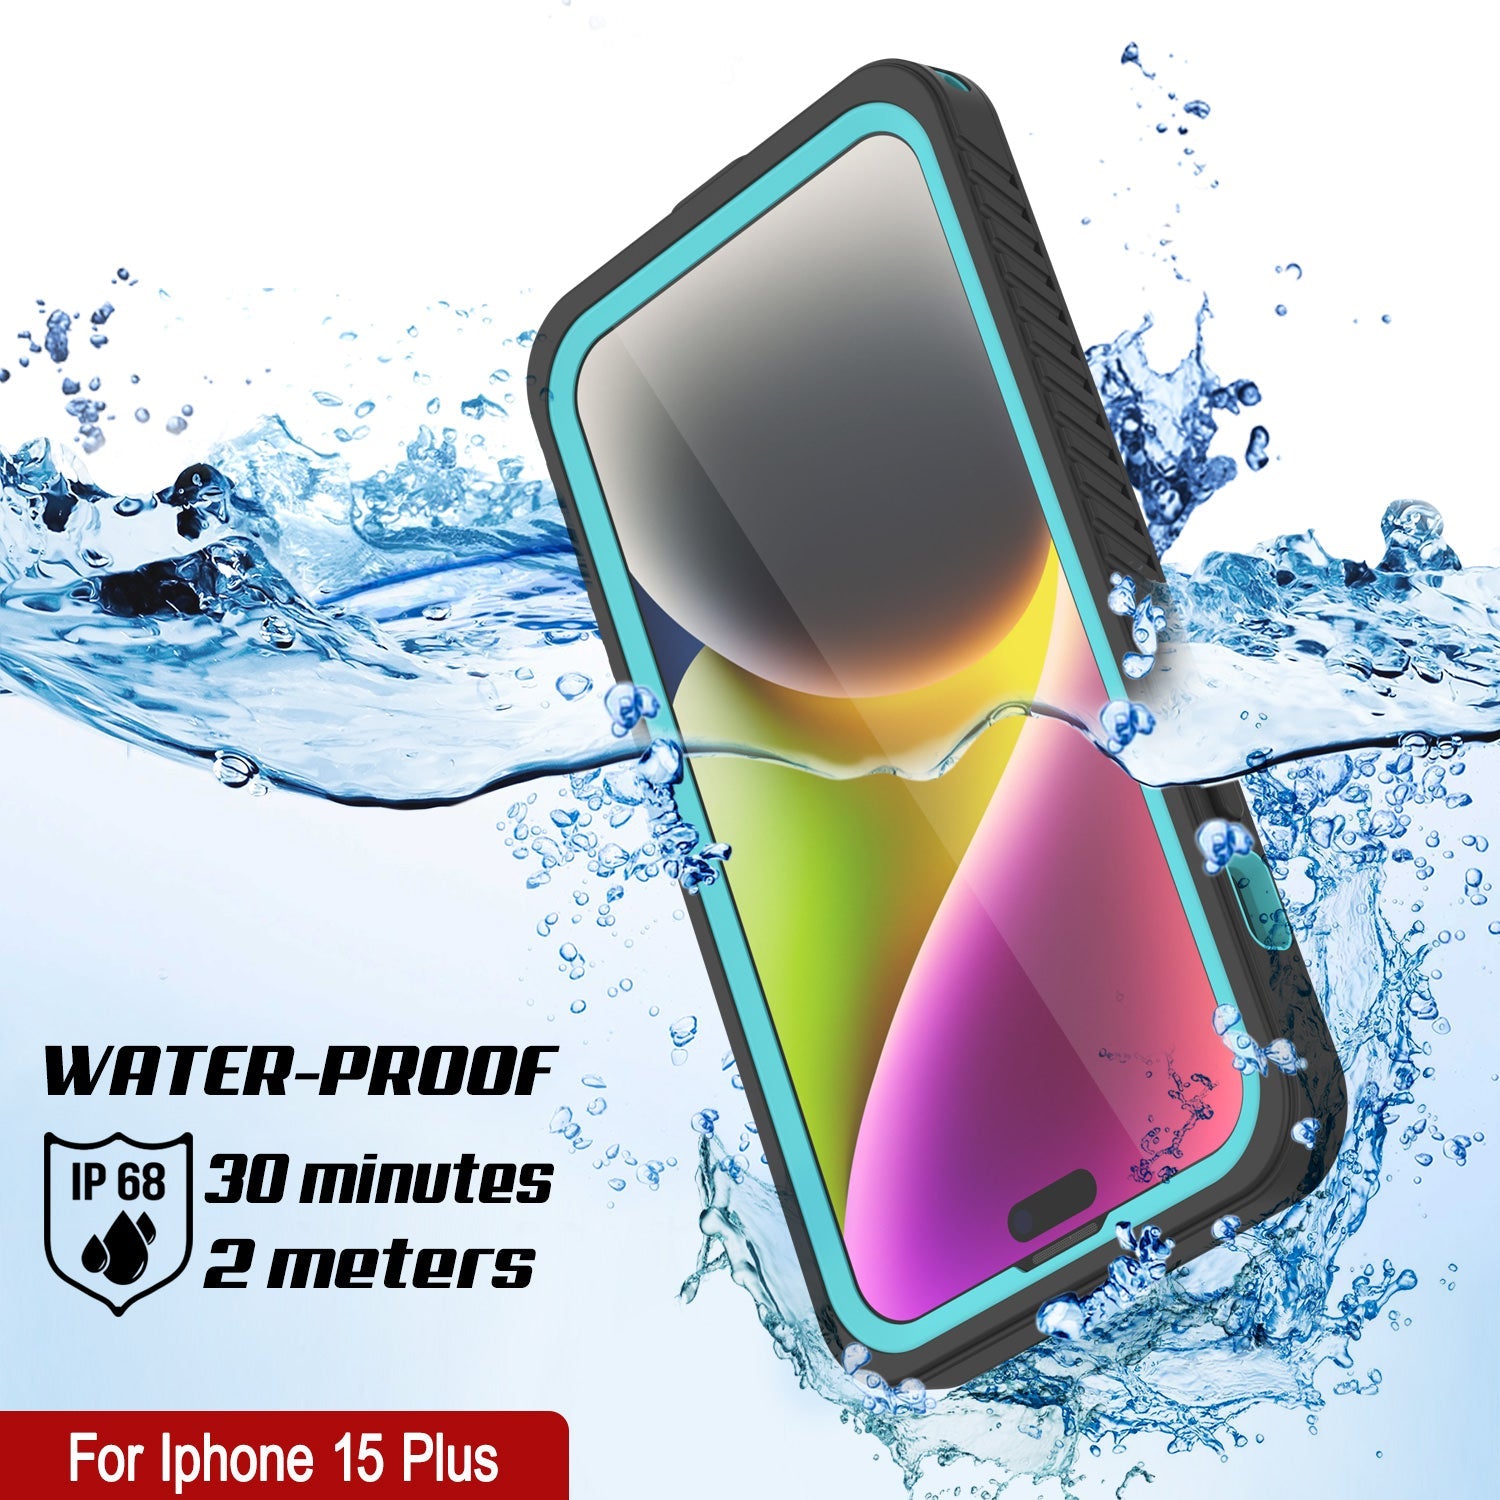 iPhone 15 Plus Waterproof Case, Punkcase [Extreme Series] Armor Cover W/ Built In Screen Protector [Teal]